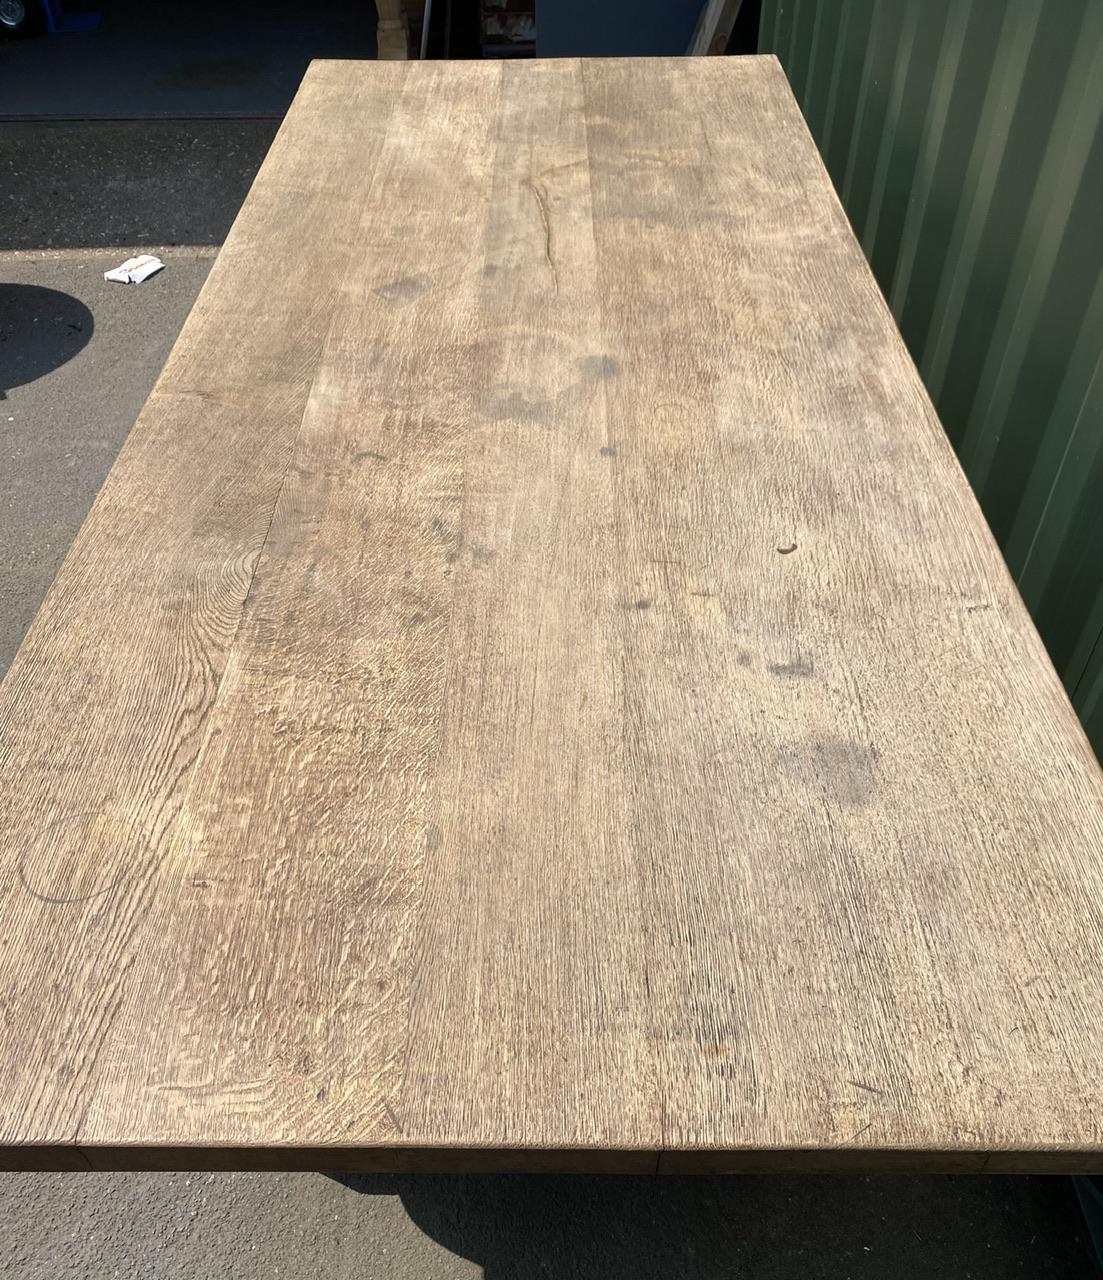 A very rare Table being not only long but very deep also which is extremely hard to find. Made from Solid Oak and dating to the early 1900s it is of excellent quality construction and will be around for generations to come. 
We have bleached it